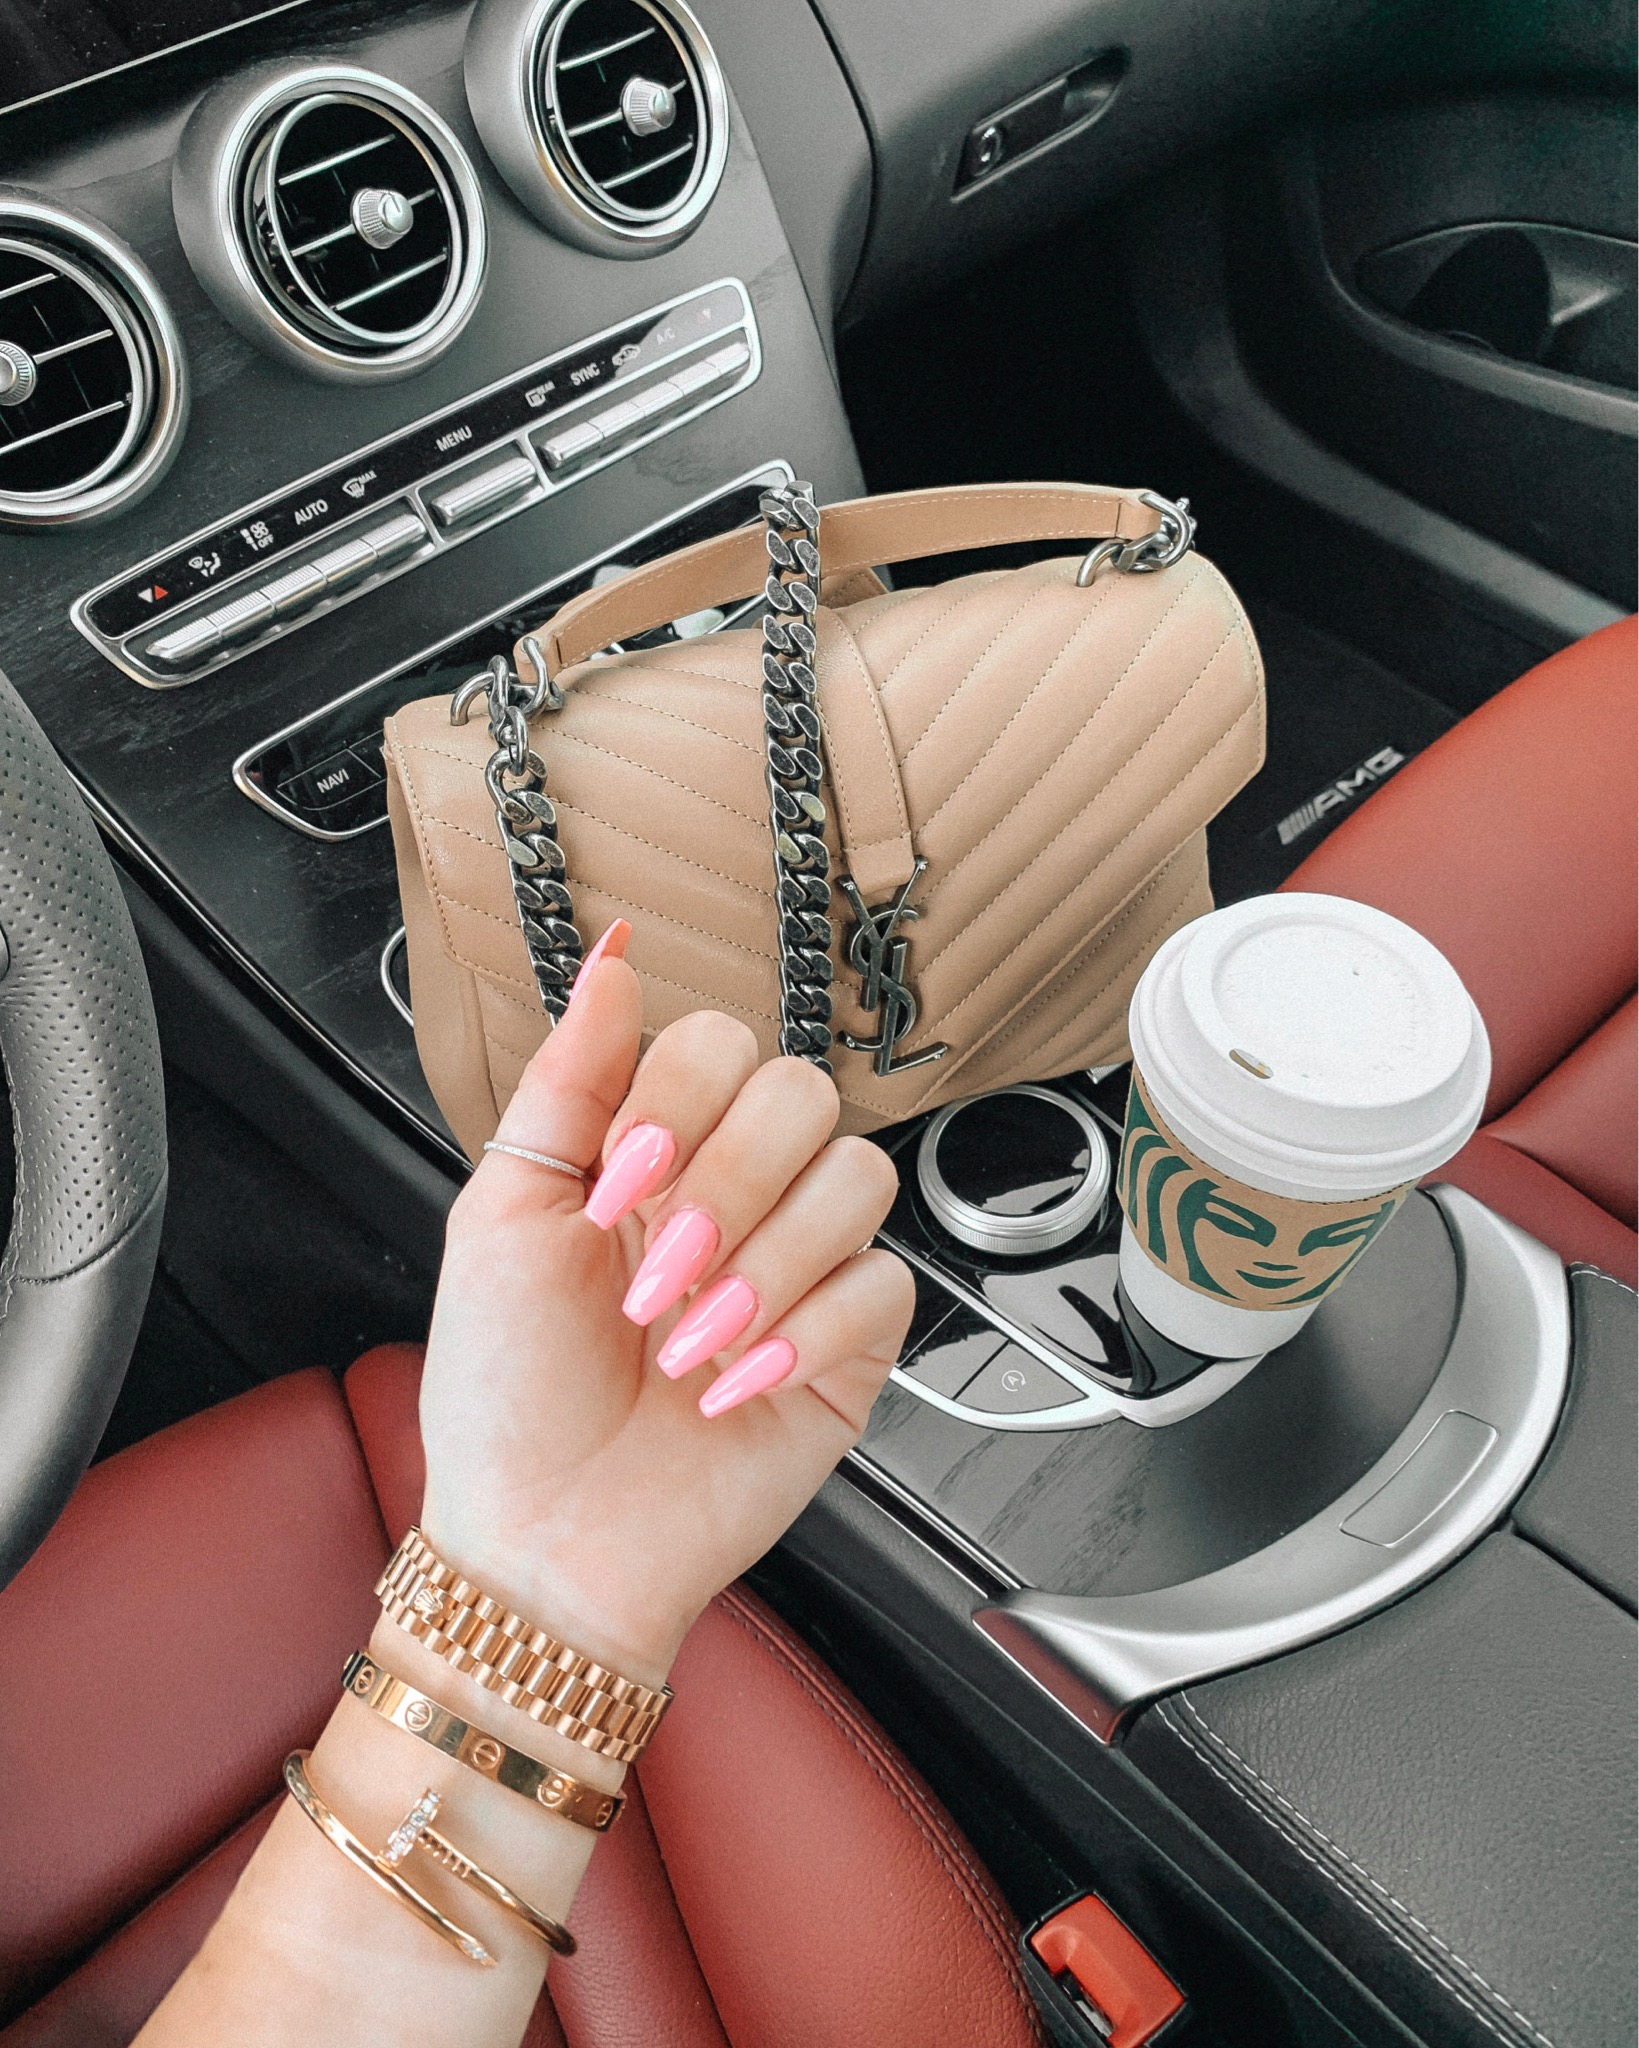 YSL Medium College Bag | Taupe Bag | YSL Bag Review | Mercedes Benz | Photo Inso | Blondie in the City by Hayley Larue